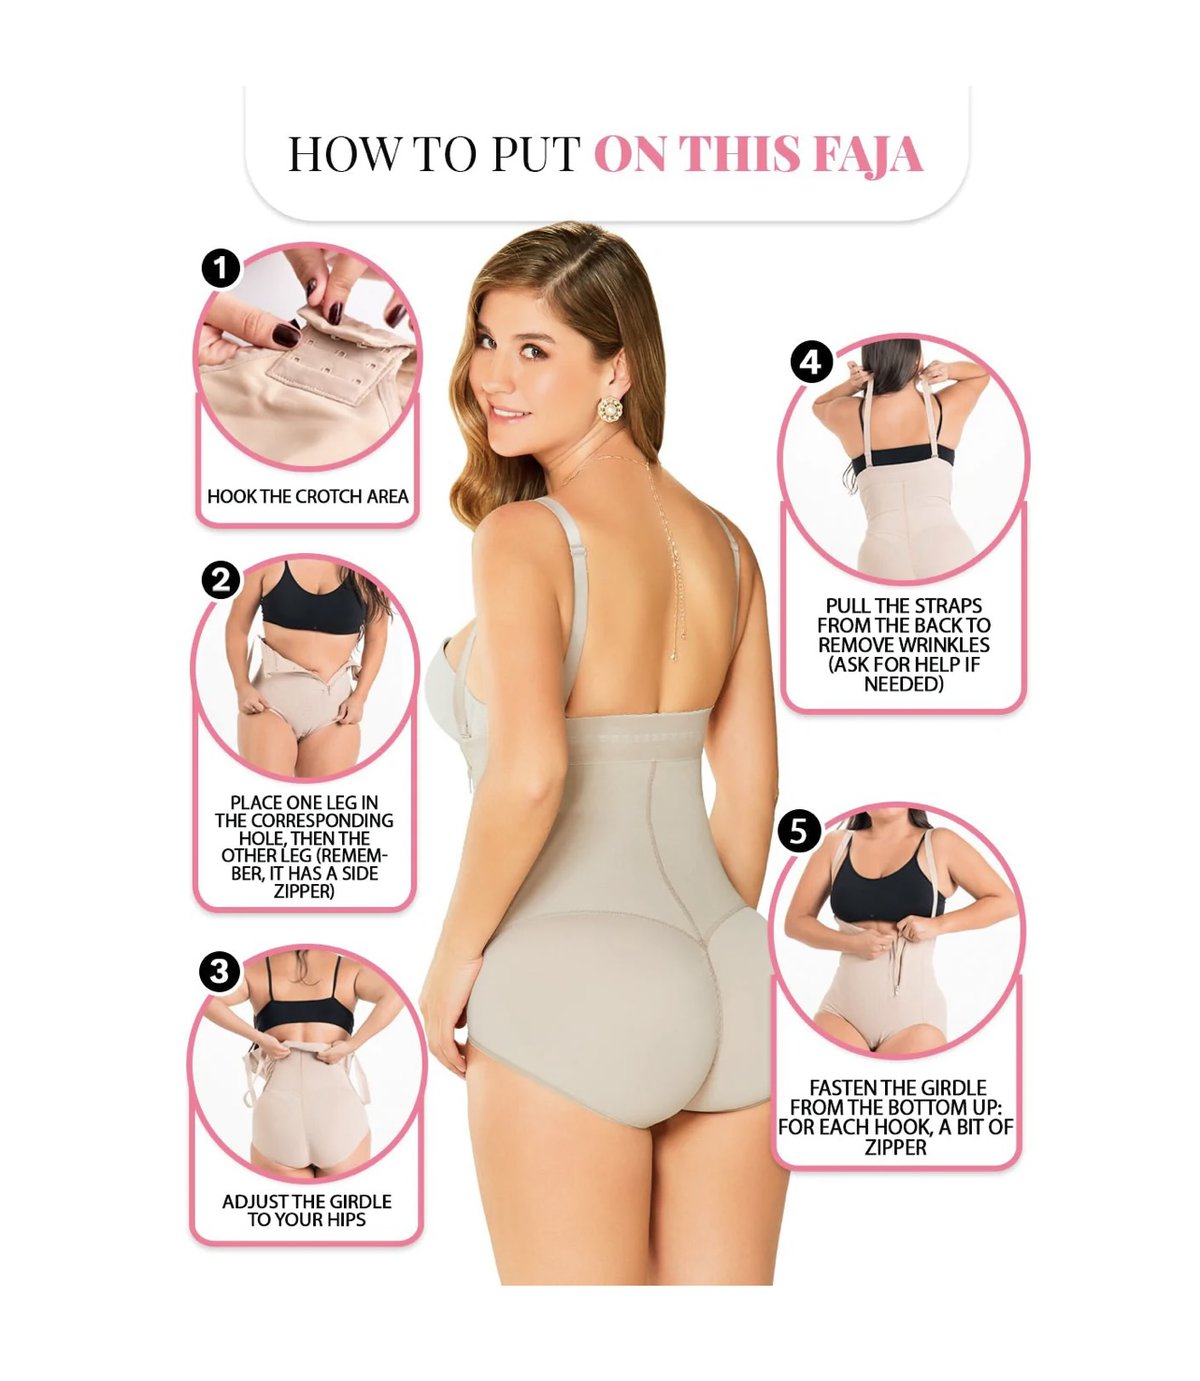 Fun Fact: you can wear our faja under your clothes for a snatched